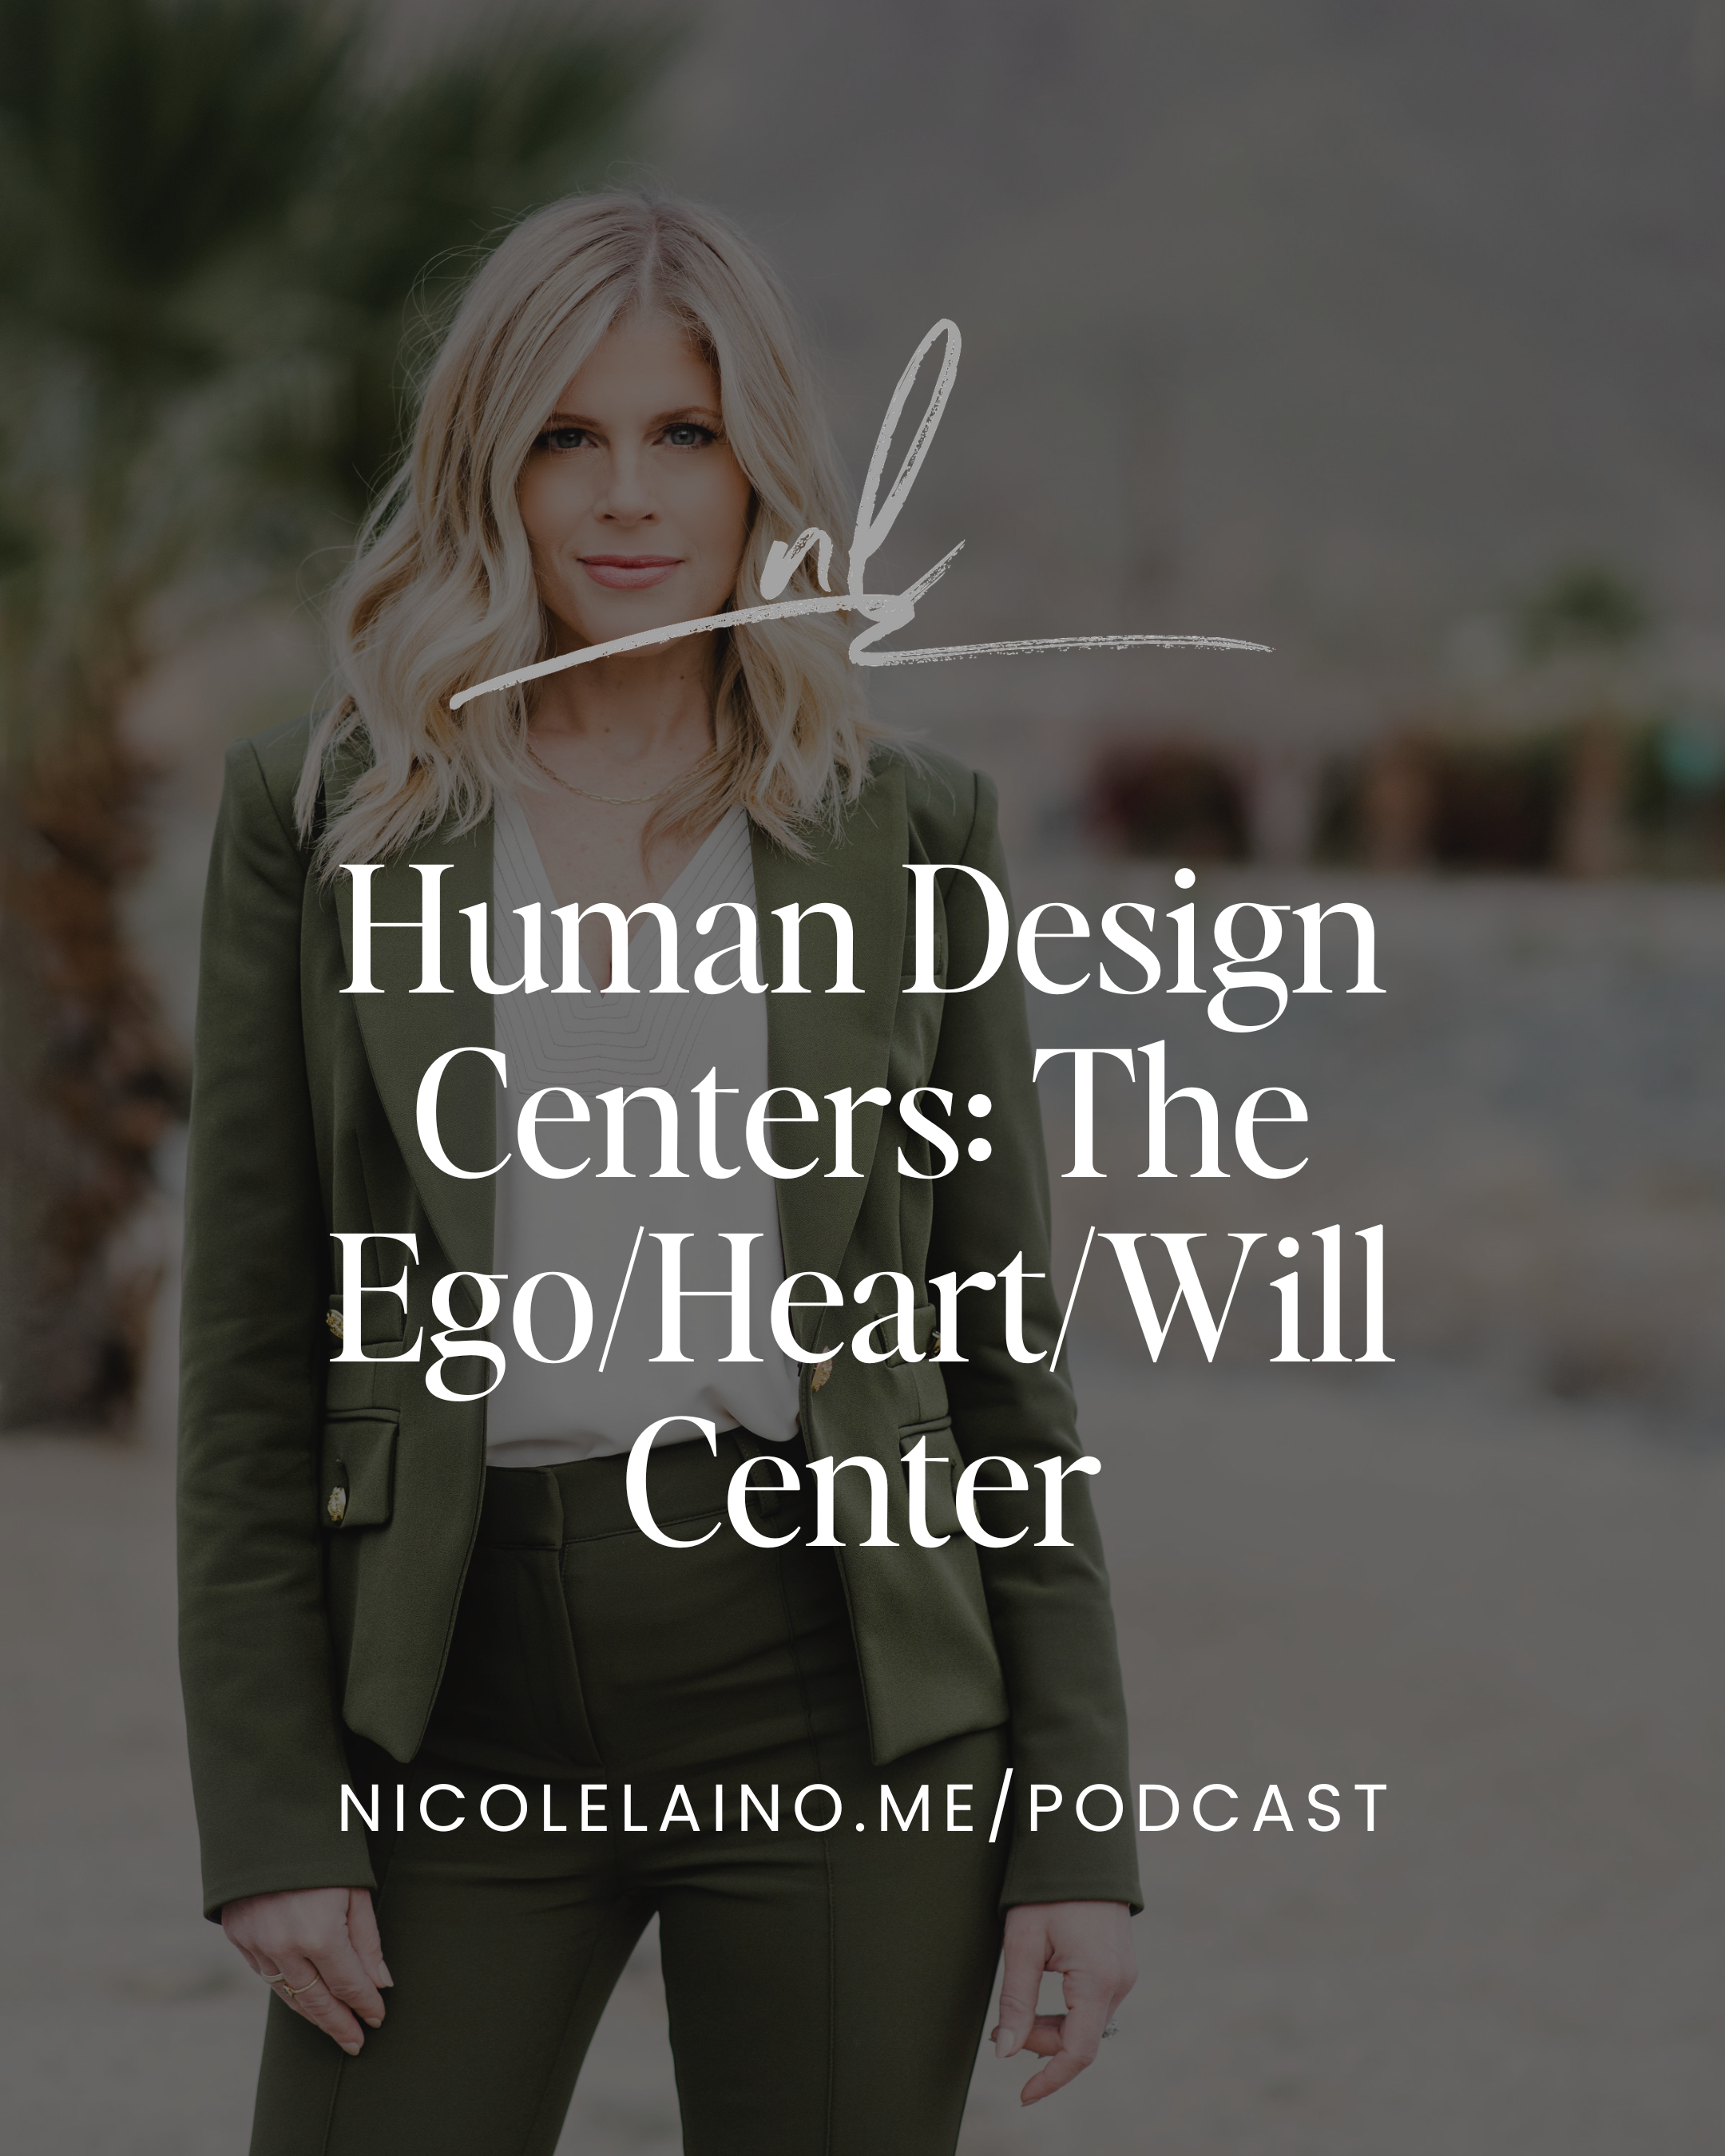 Human Design Centers: The Ego/Heart/Will Center